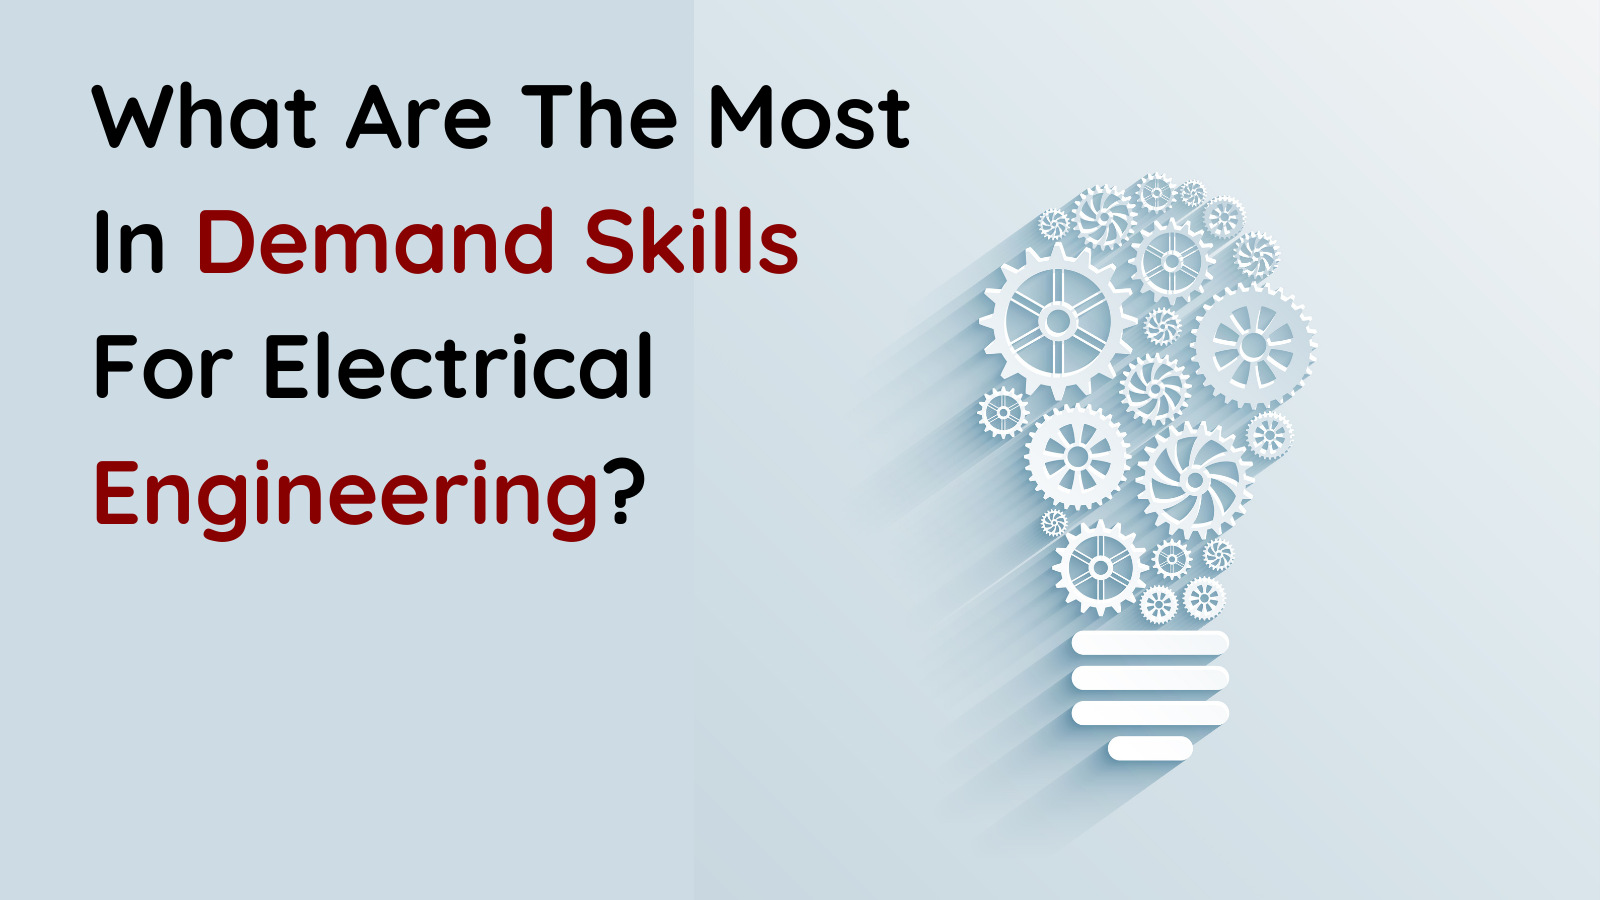 What Are The Most In-Demand Skills For Electrical Engineering?